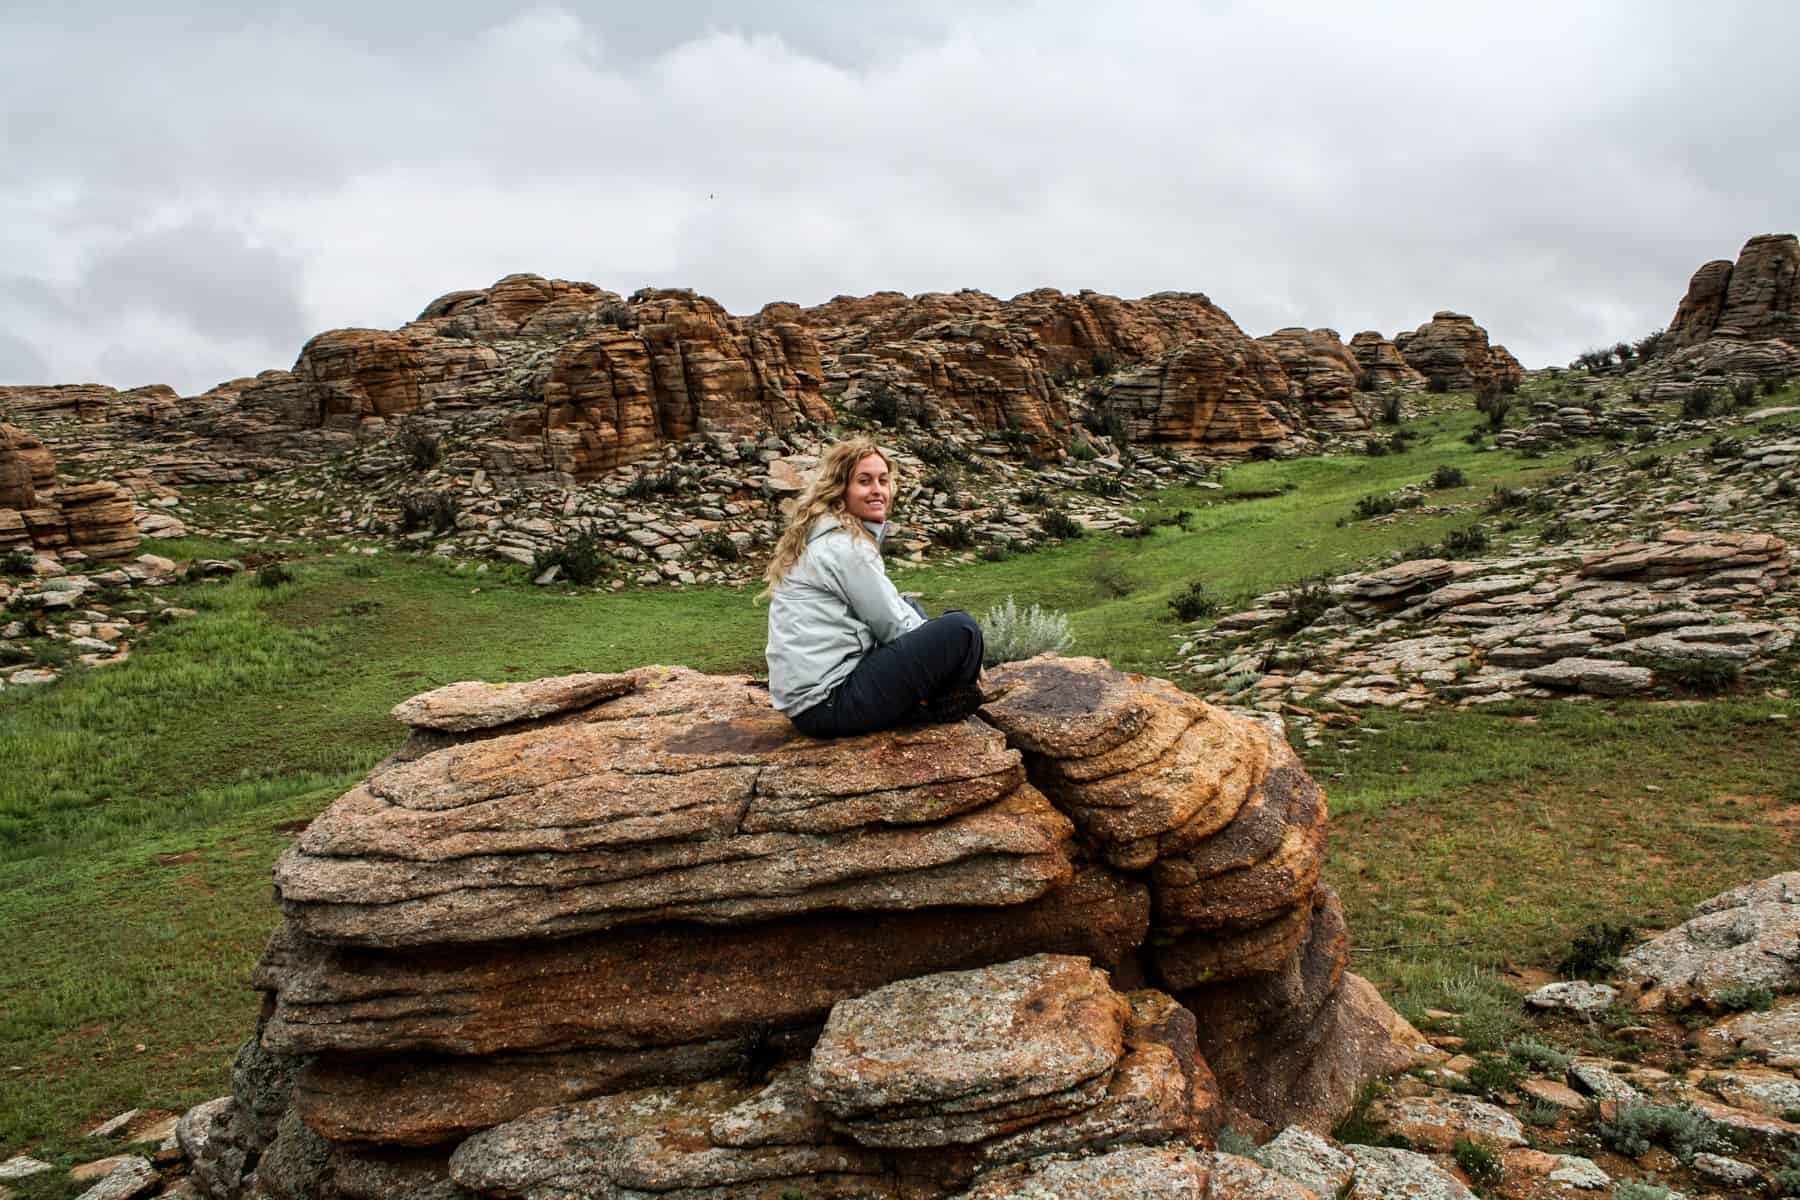 A woman sits crosslegged on top of a large rock in the middle of a grassy area, part of the Baga Gazryn Chuluu rock formations Mongolia